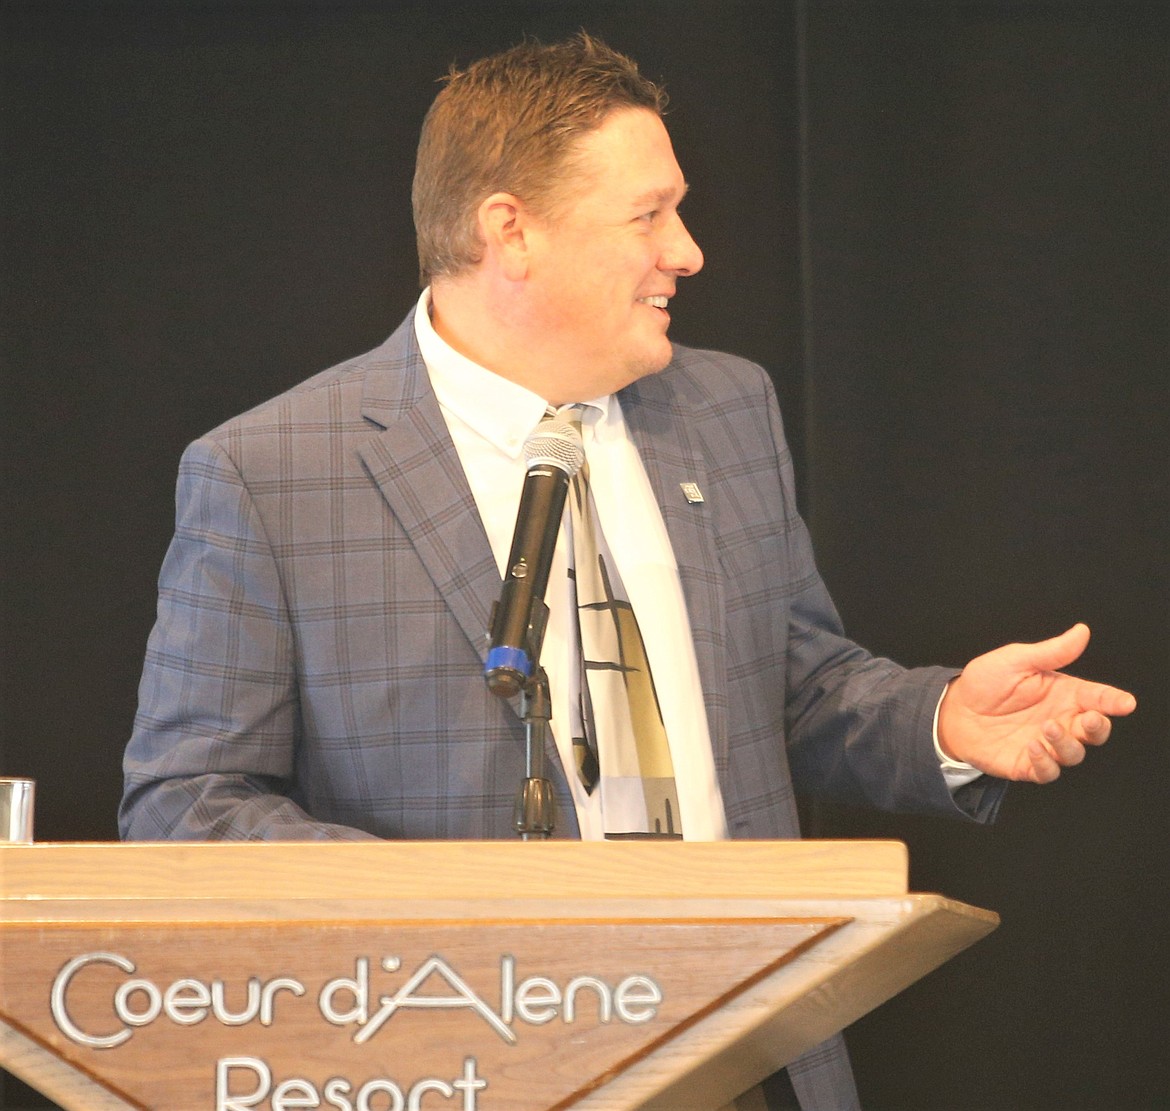 Realtor Greg Rowley speaks during Coldwell Banker Schneidmiller Realty's annual awards banquet on Thursday. Rowley received several awards, including Star Performer.